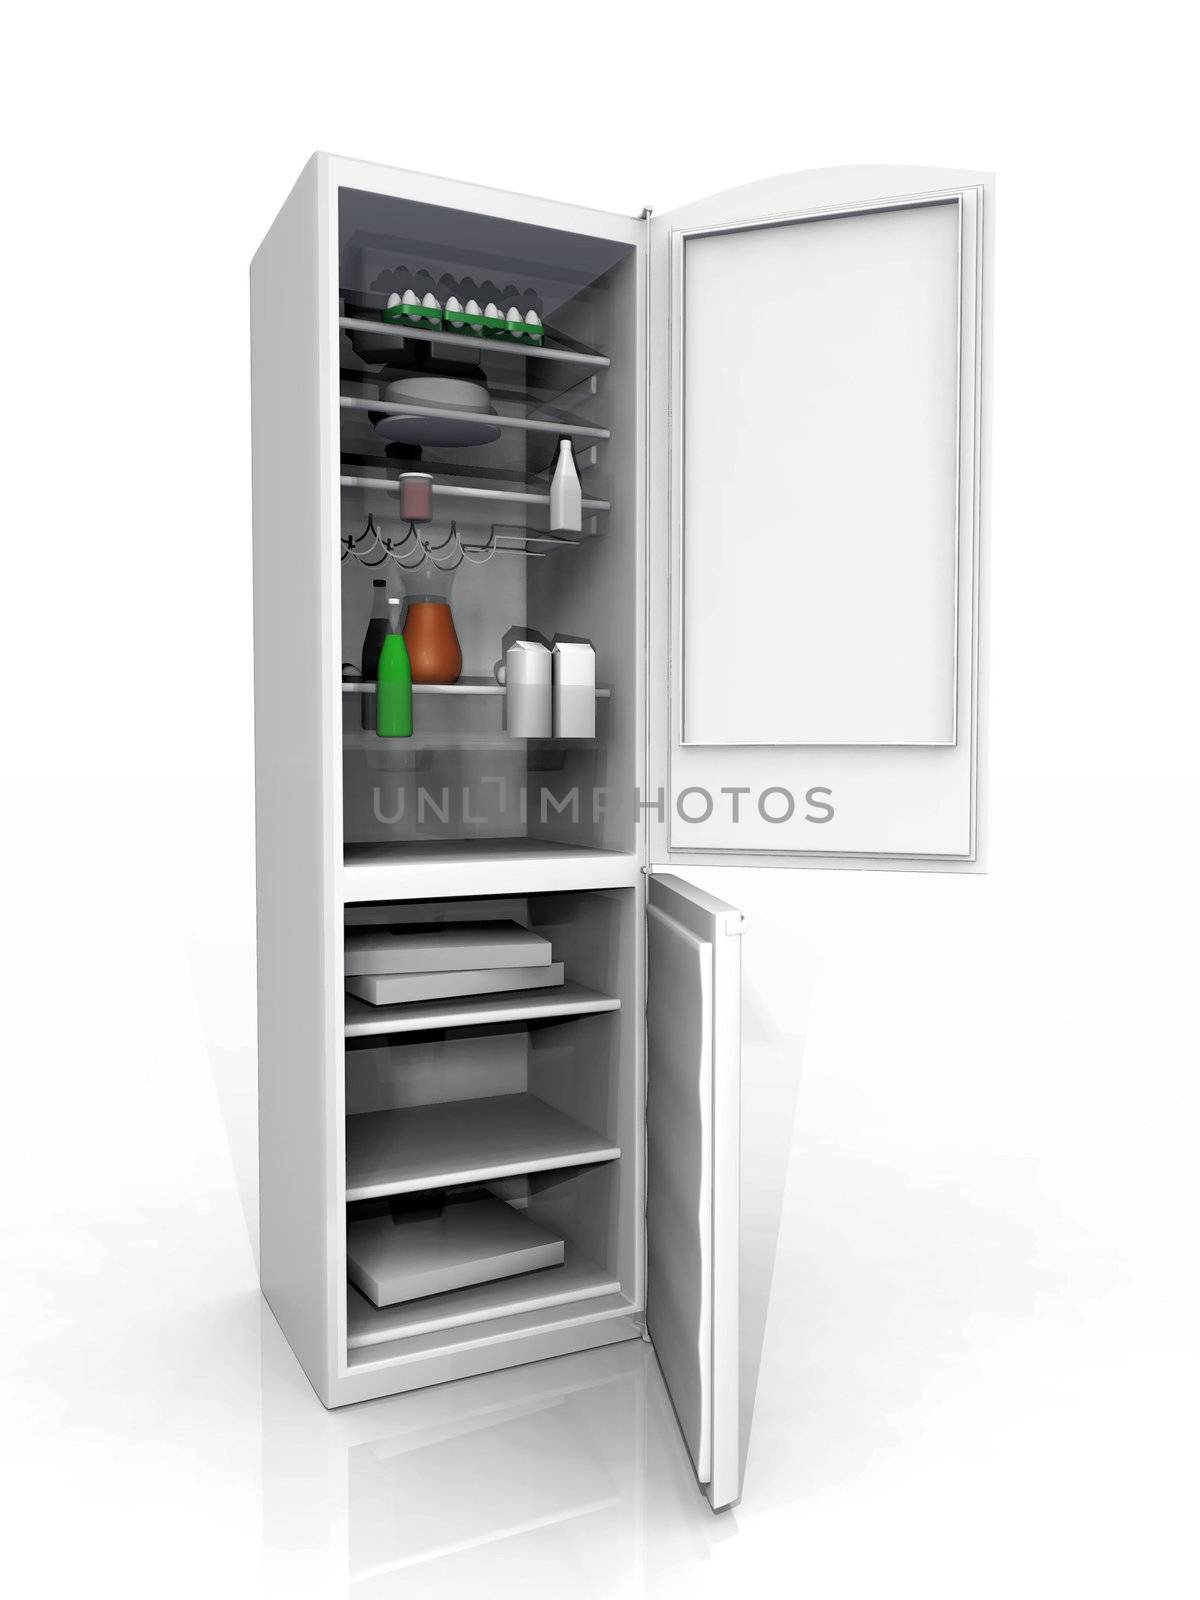 the refrigerator and freezer on a white background